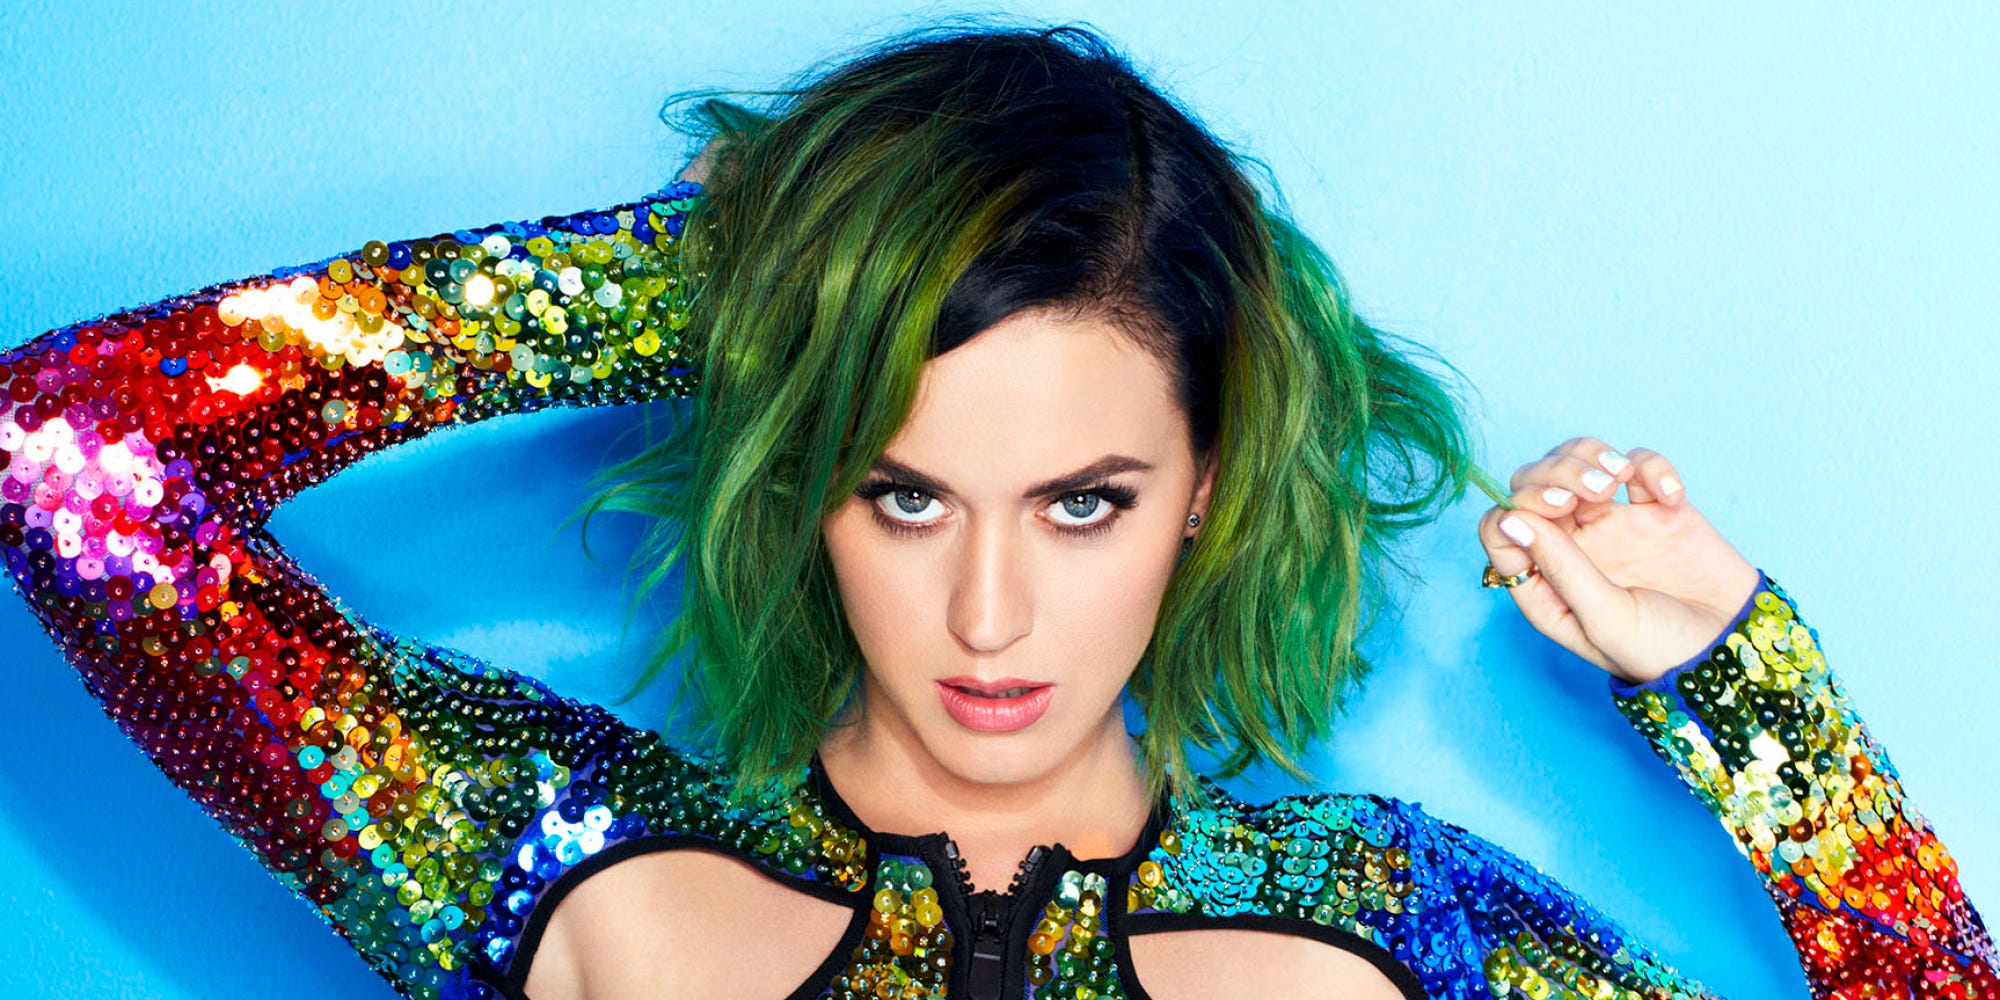 2. How to Recreate Katy Perry's Blue Hair Costume - wide 5